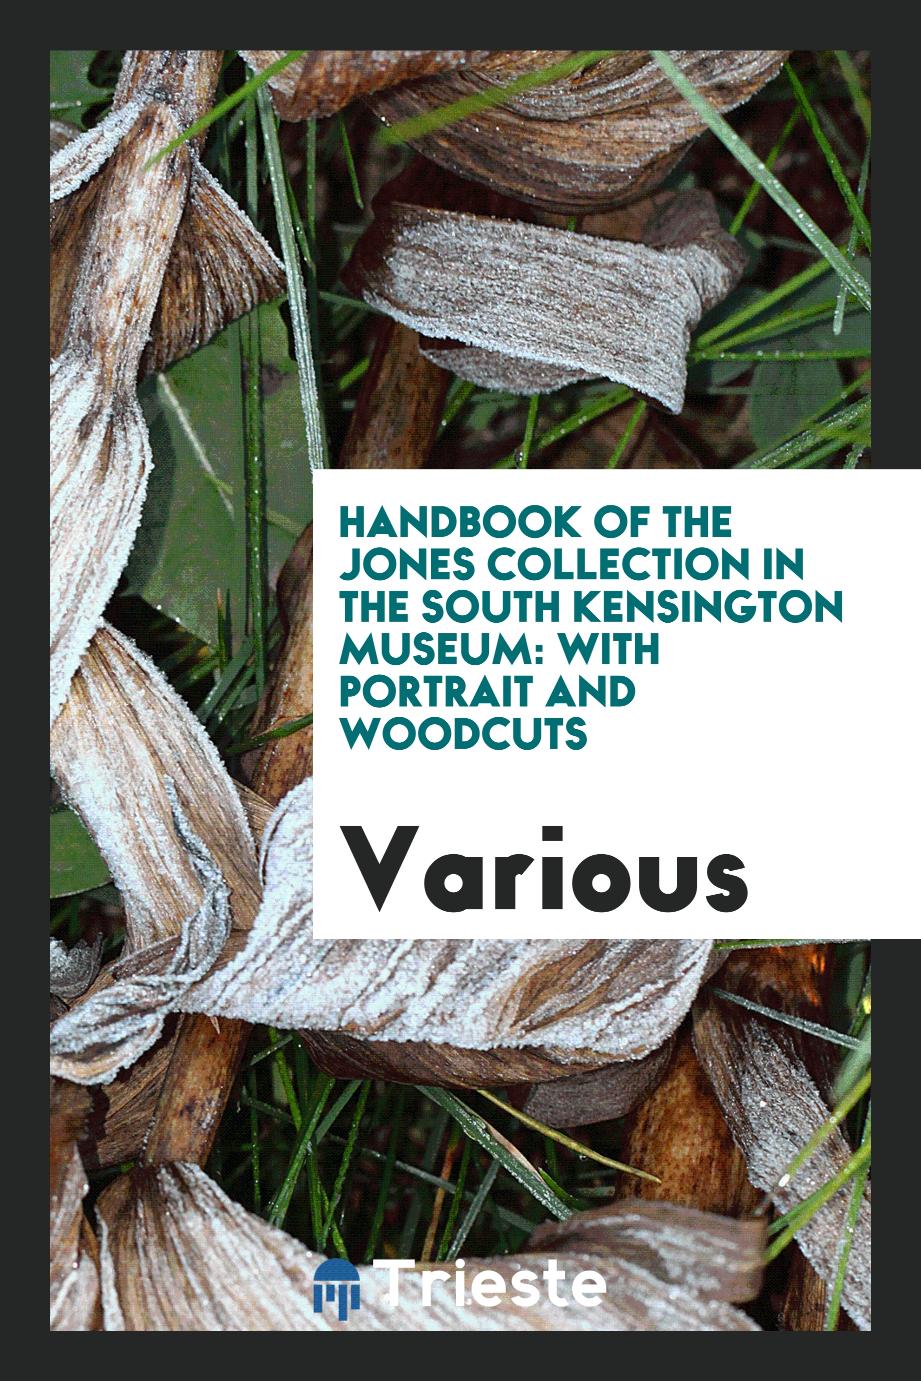 Handbook of the Jones Collection in the South Kensington Museum: With Portrait and Woodcuts